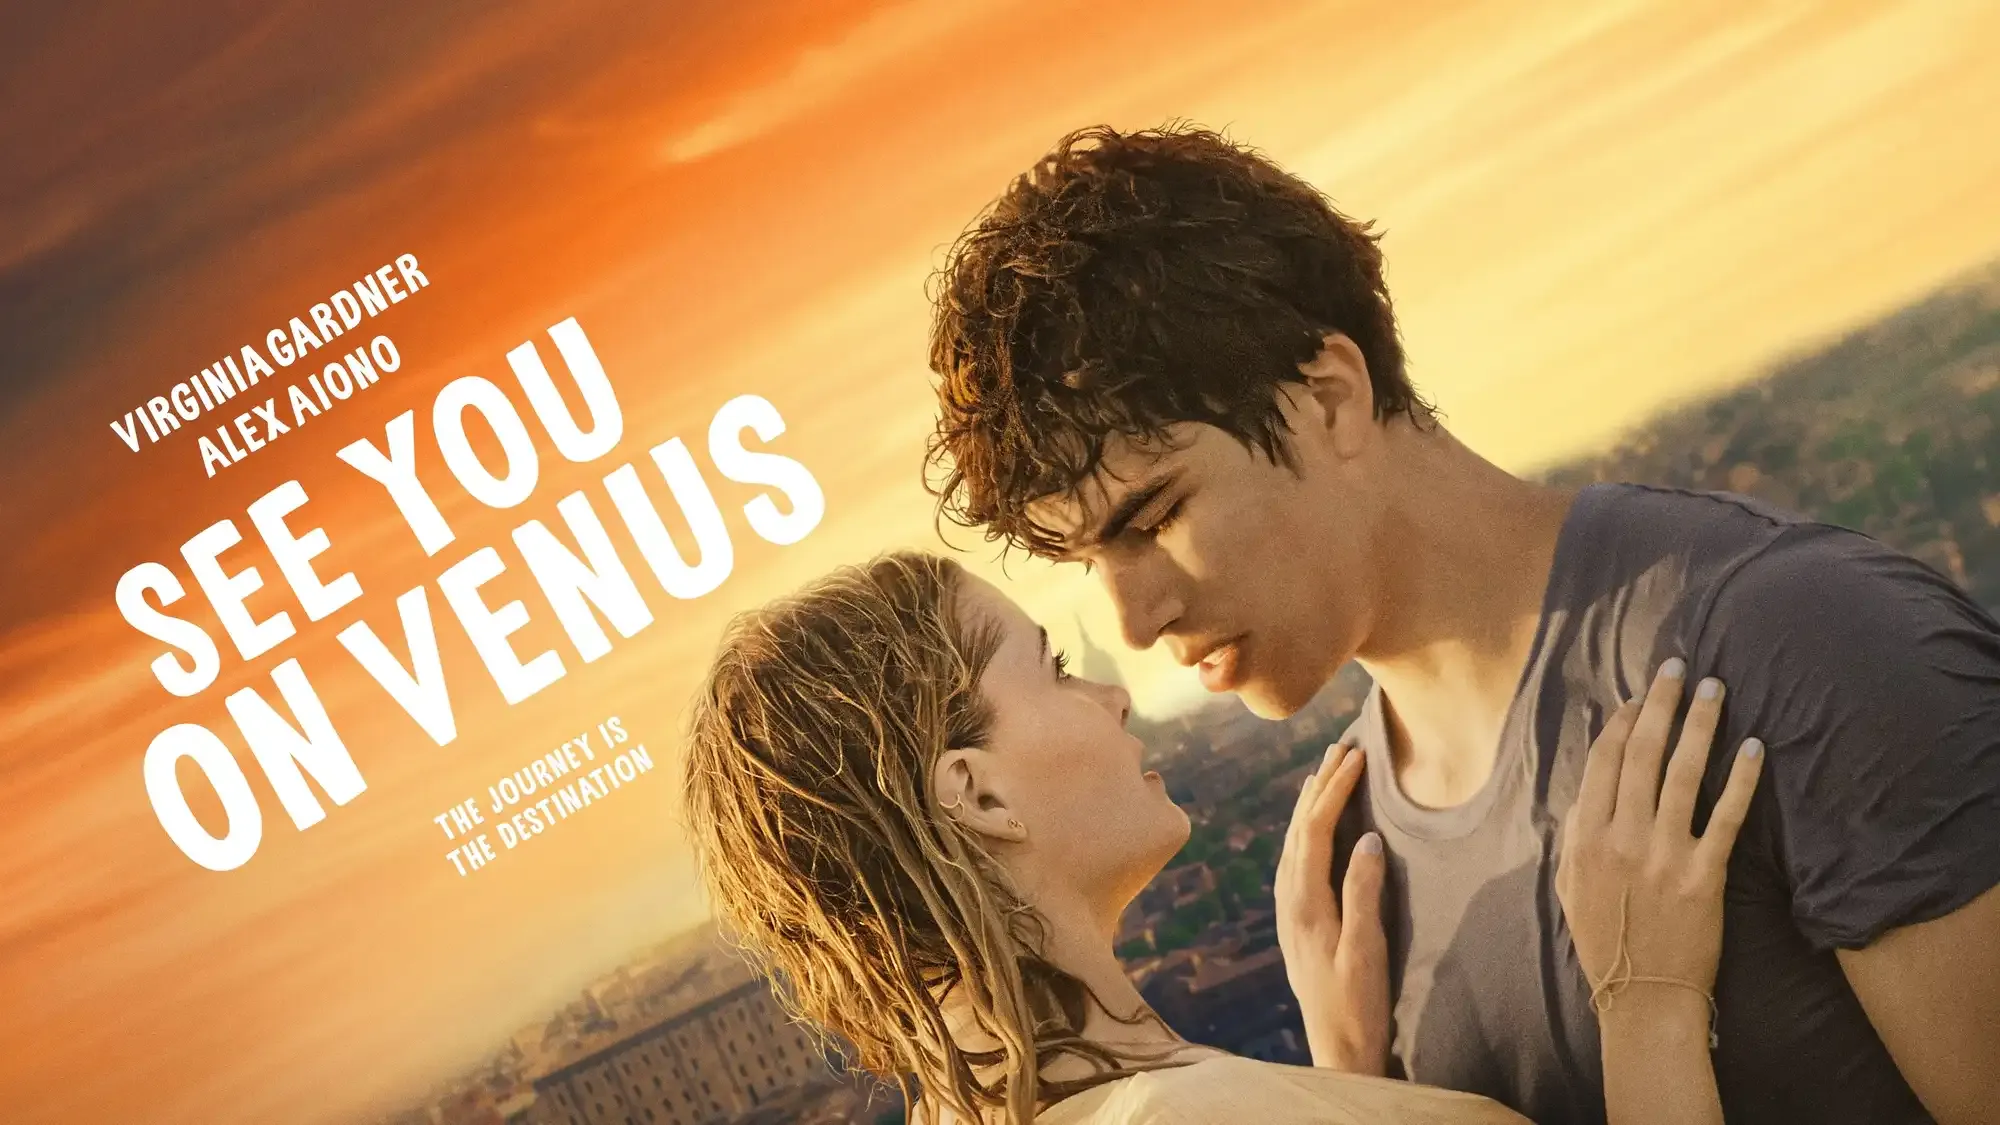 See You on Venus movie review